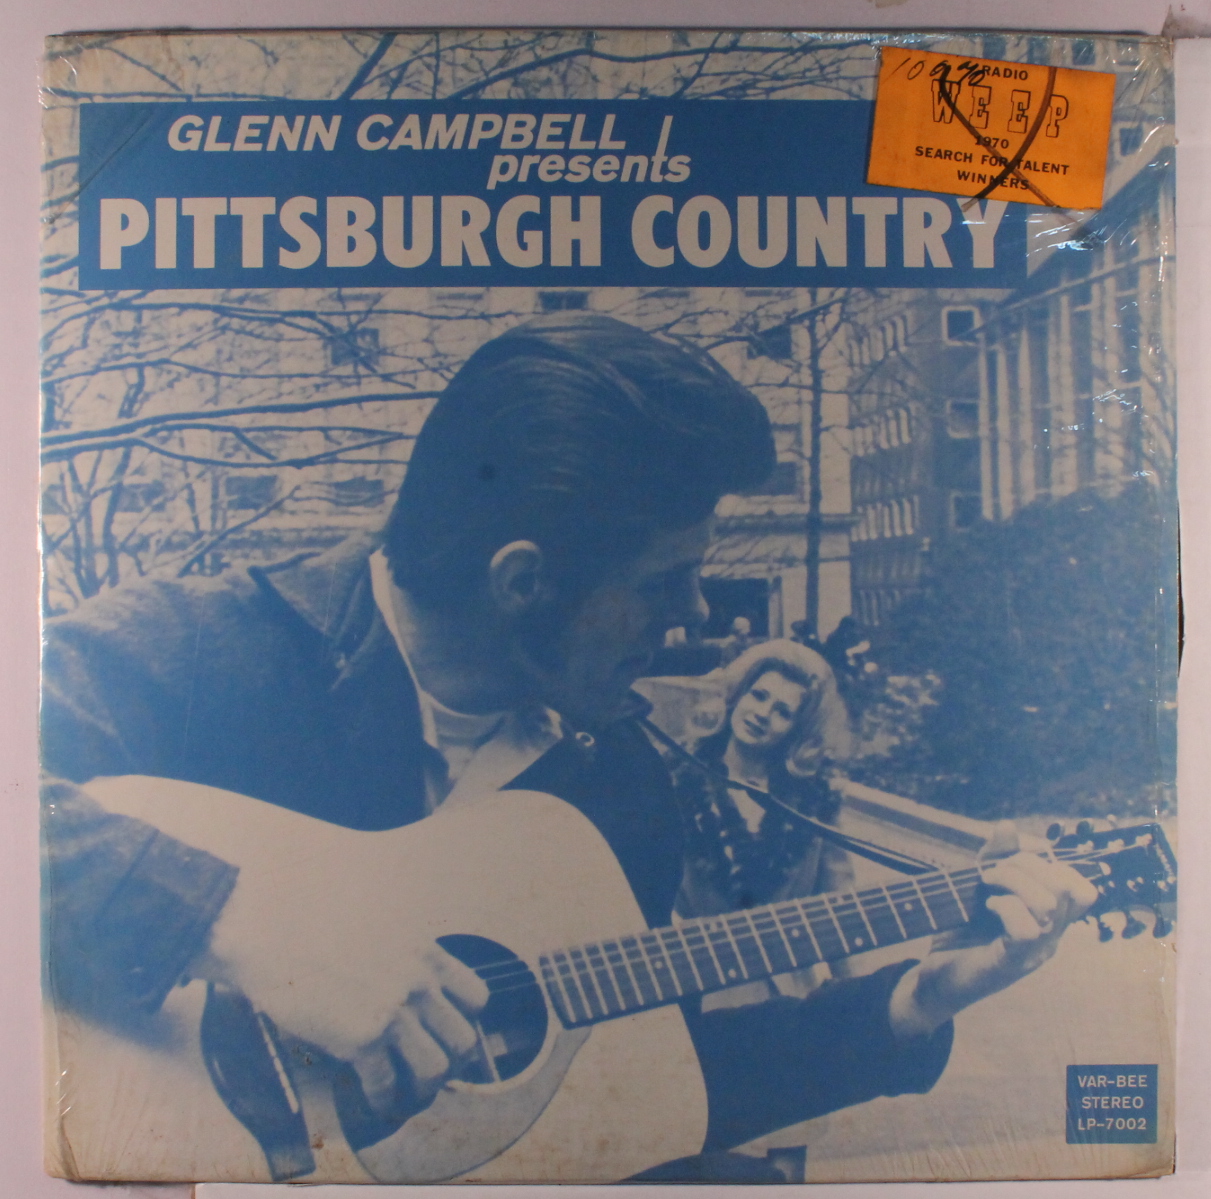 Glenn Campbell Presents Pittsburgh Country_front album cover.JPG